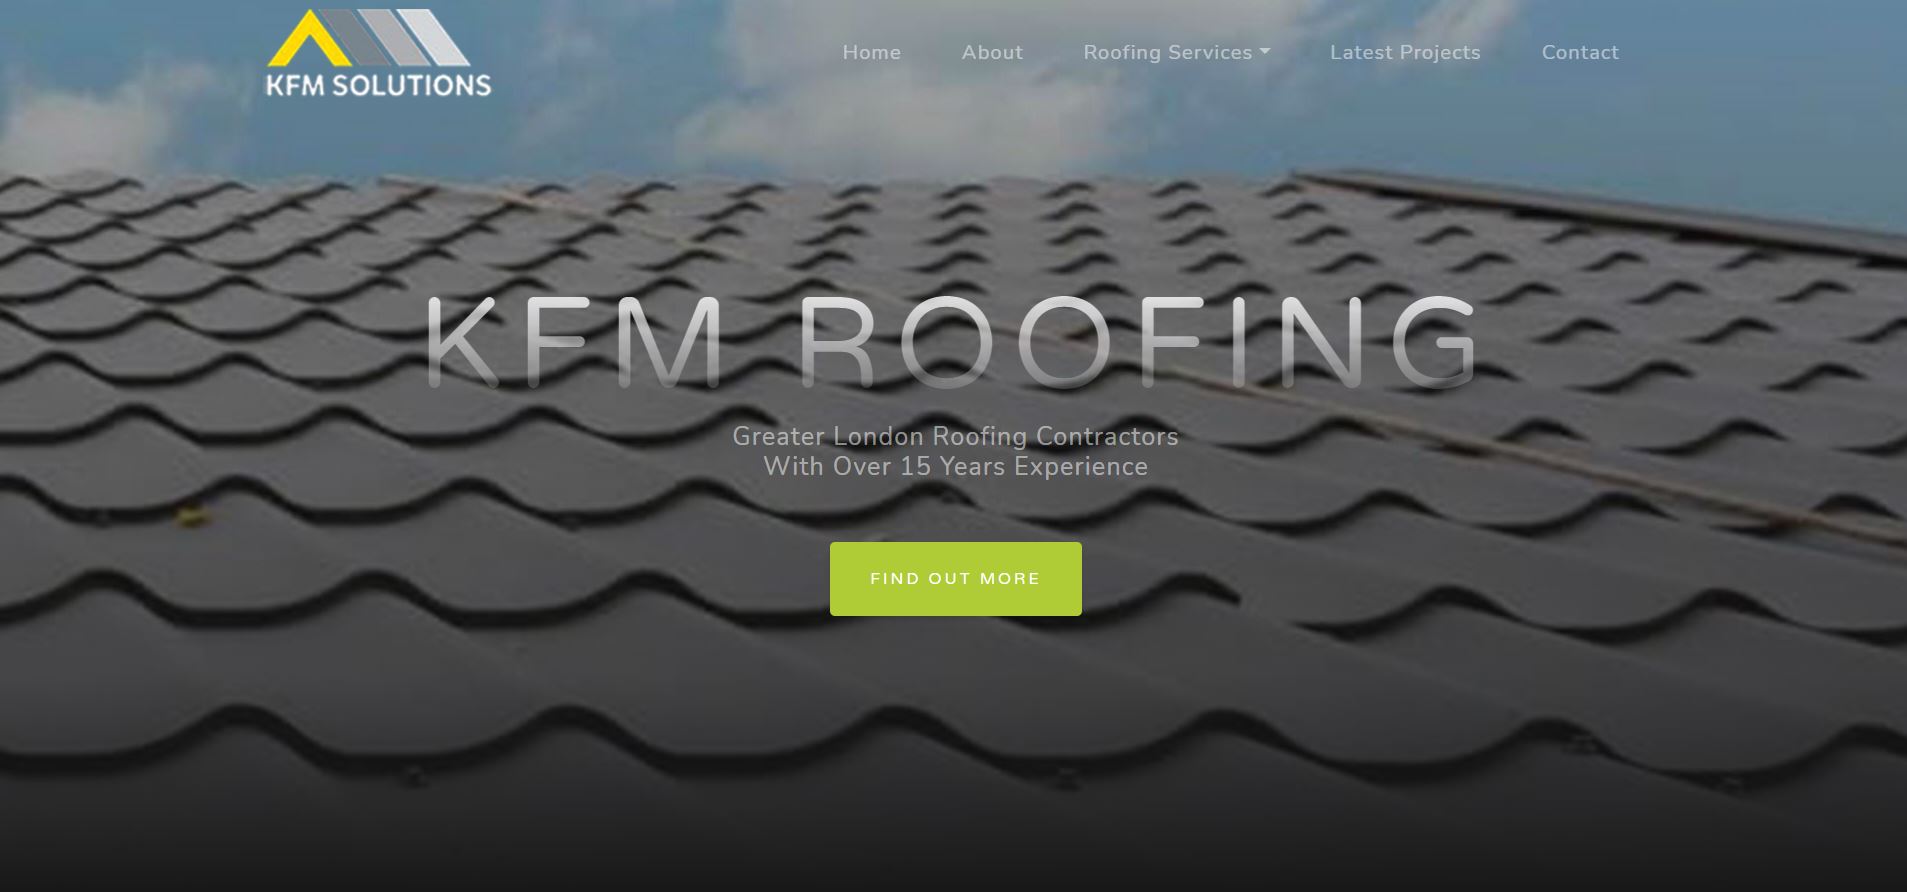 KFM Roofing Solutions